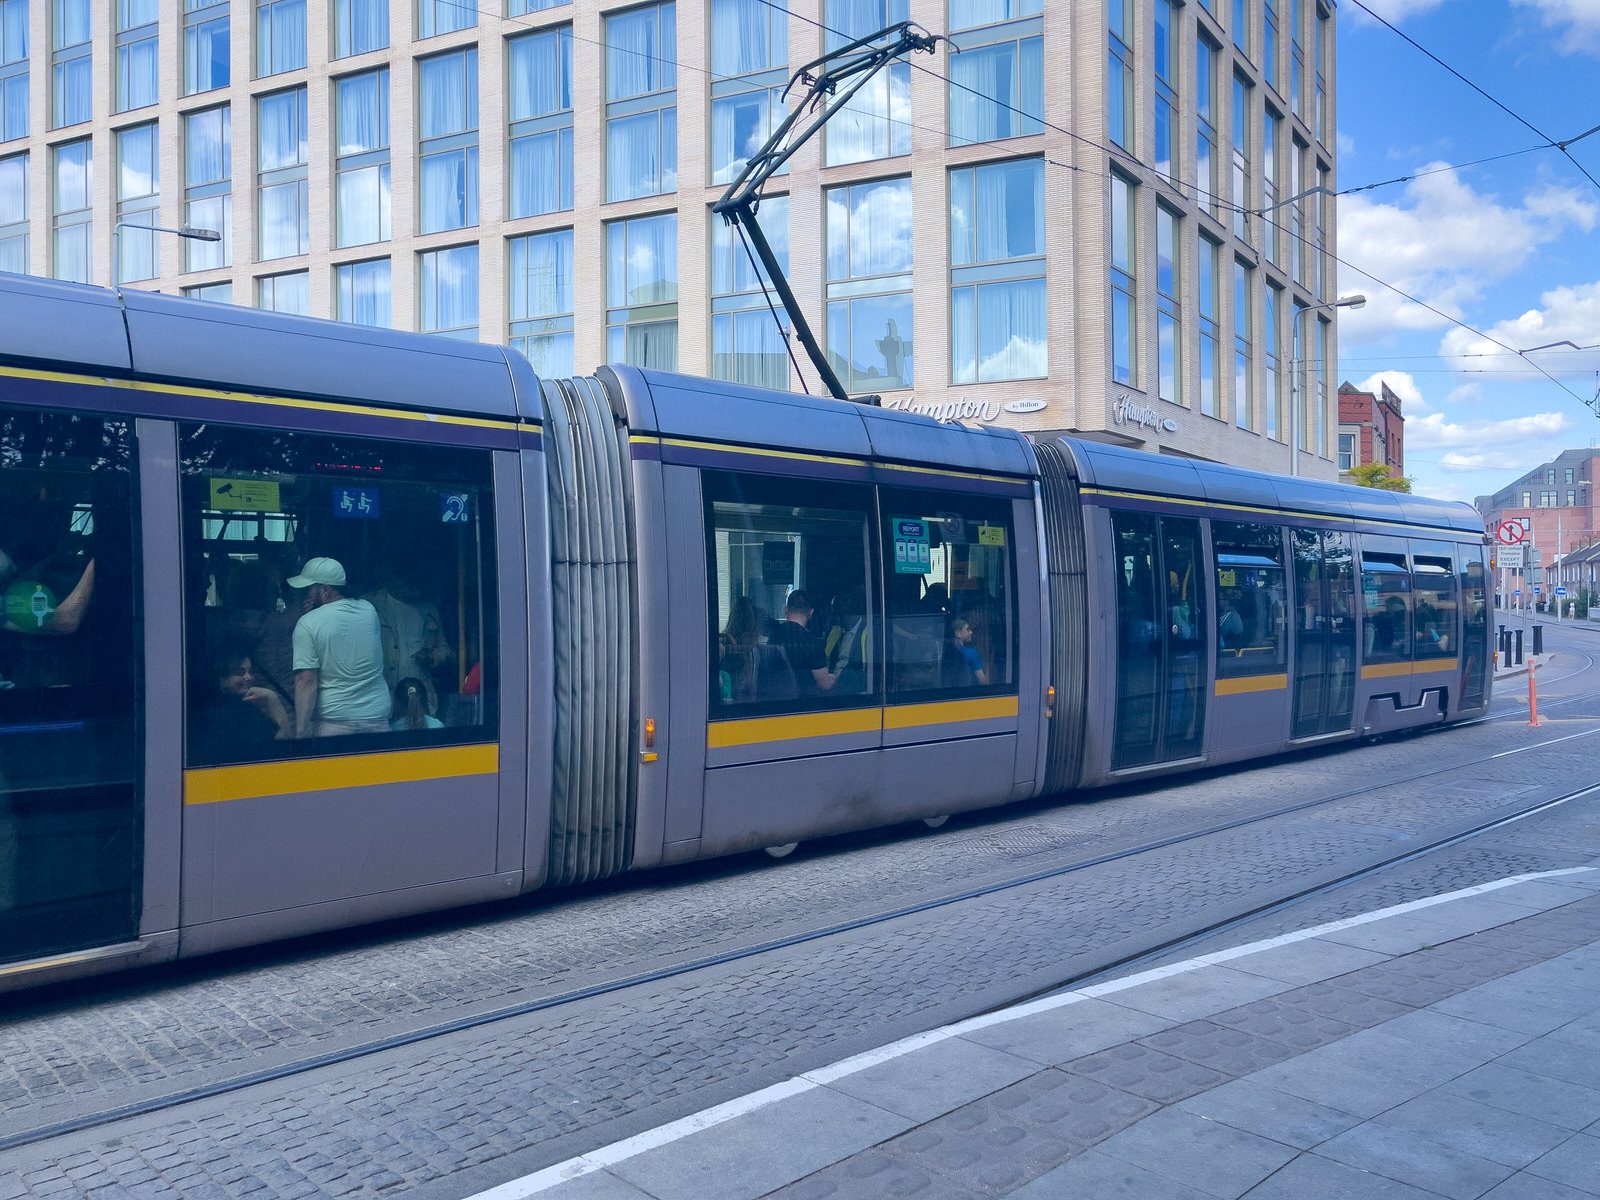 THE LUAS FOUR COURTS TRAM STOP [THERE IS MUCH TO BE SEEN HERE]-234109-1